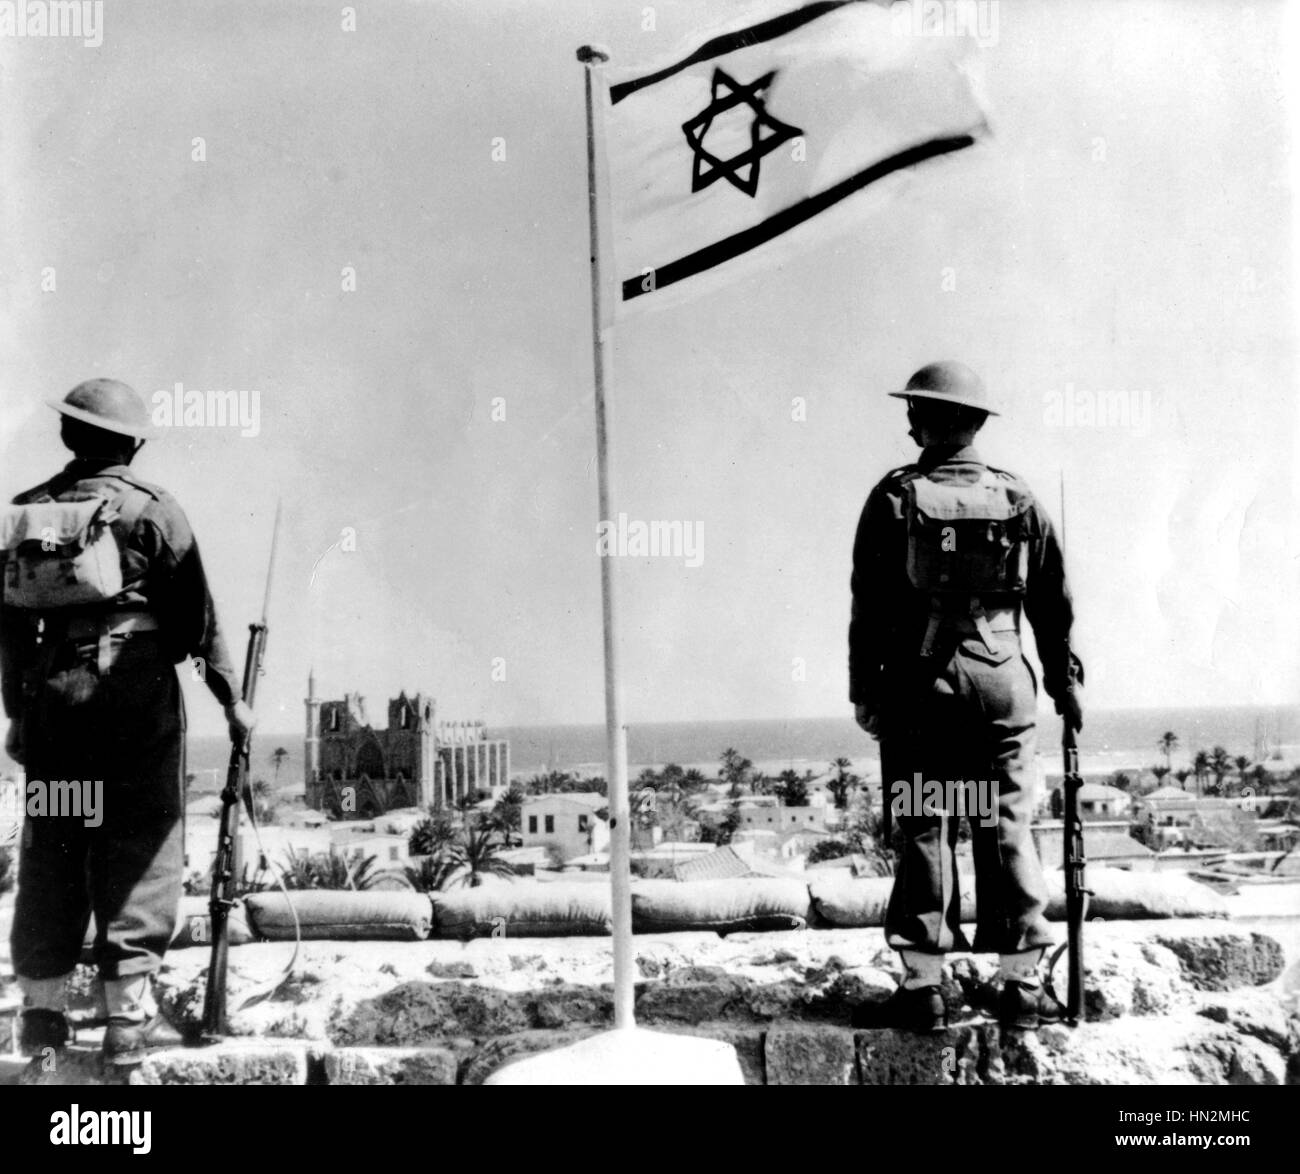 Jewish 'Foreign Legion' guards crusader ramparts in Cyprus. Two soldiers standing on wall alongside the Jewish National flag. c.1948 Washington, Library of Congress Stock Photo